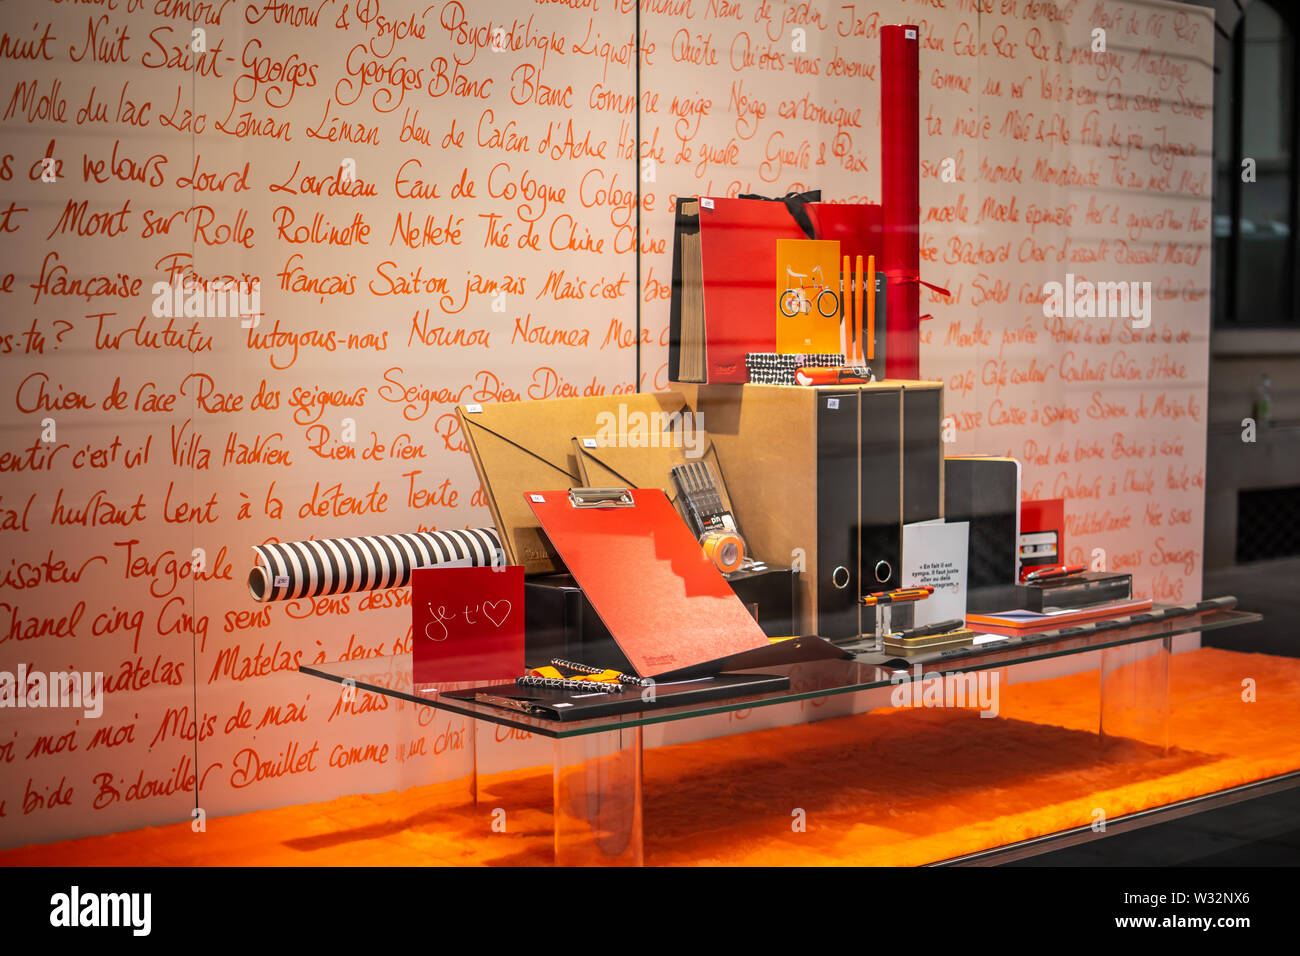 Geneva, Switzerland, Mar 2019 stylish stationery Papeterie Brachard store,  office accessories, color paper, clips, pencils, price on display for sale  Stock Photo - Alamy